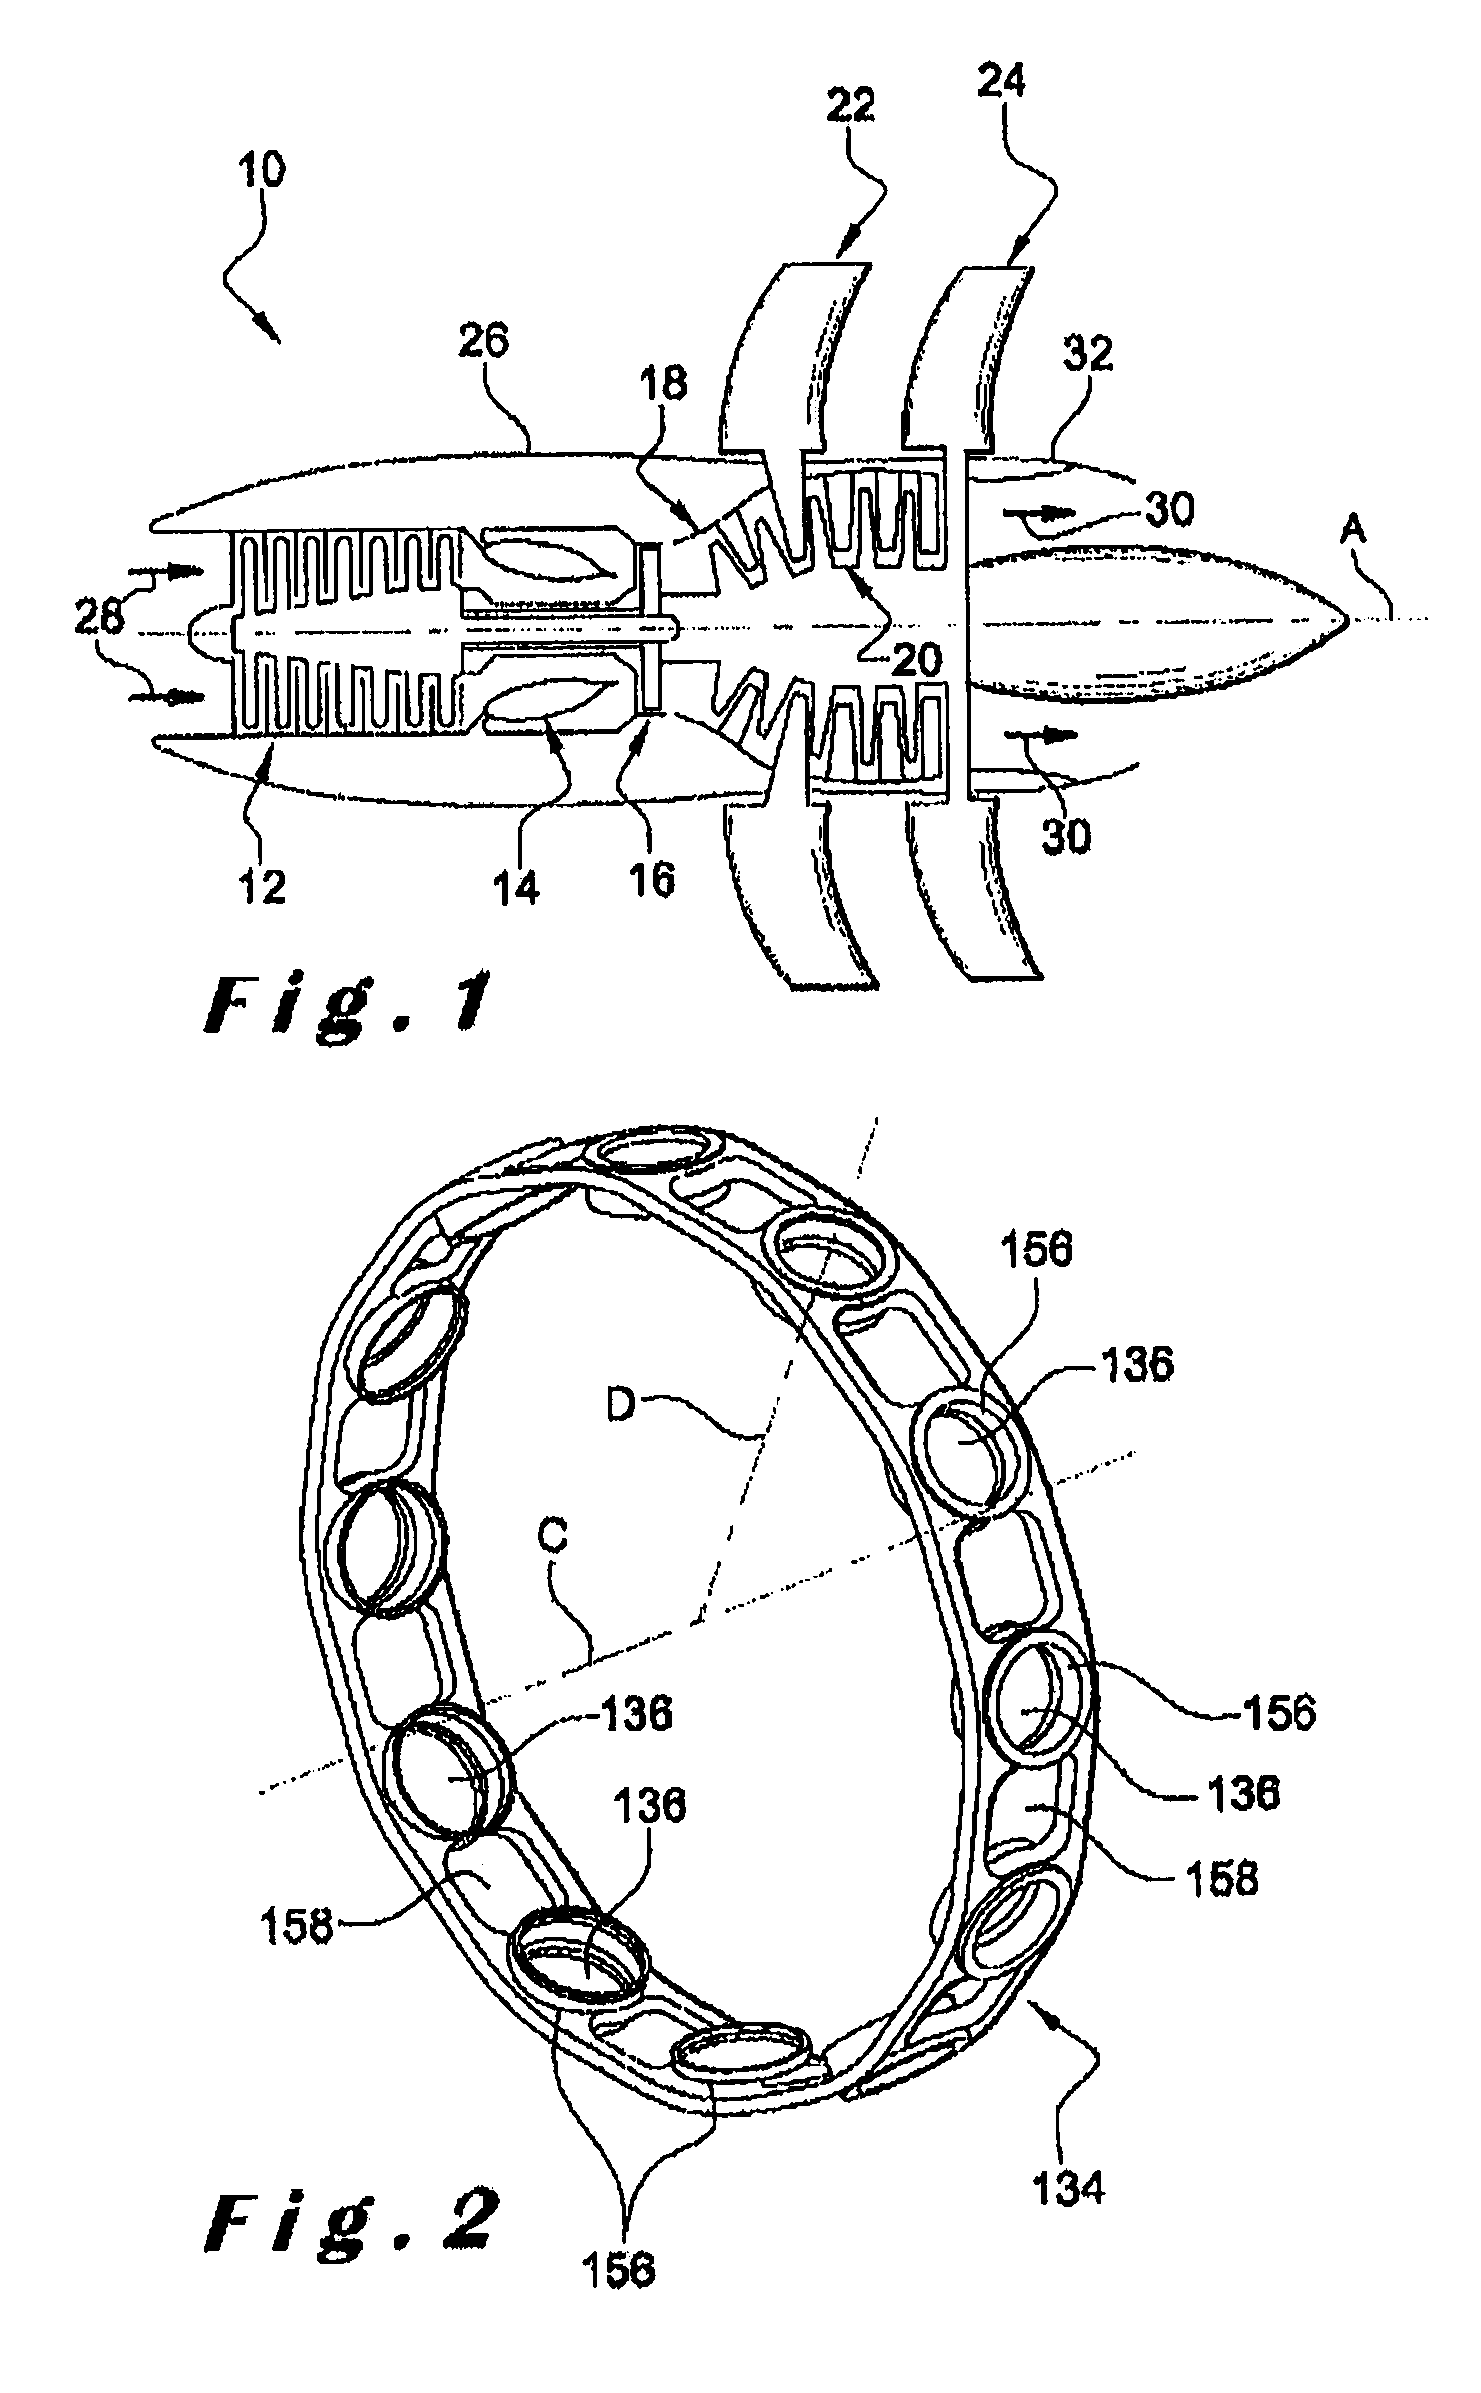 Hub for a propeller having variable pitch blades